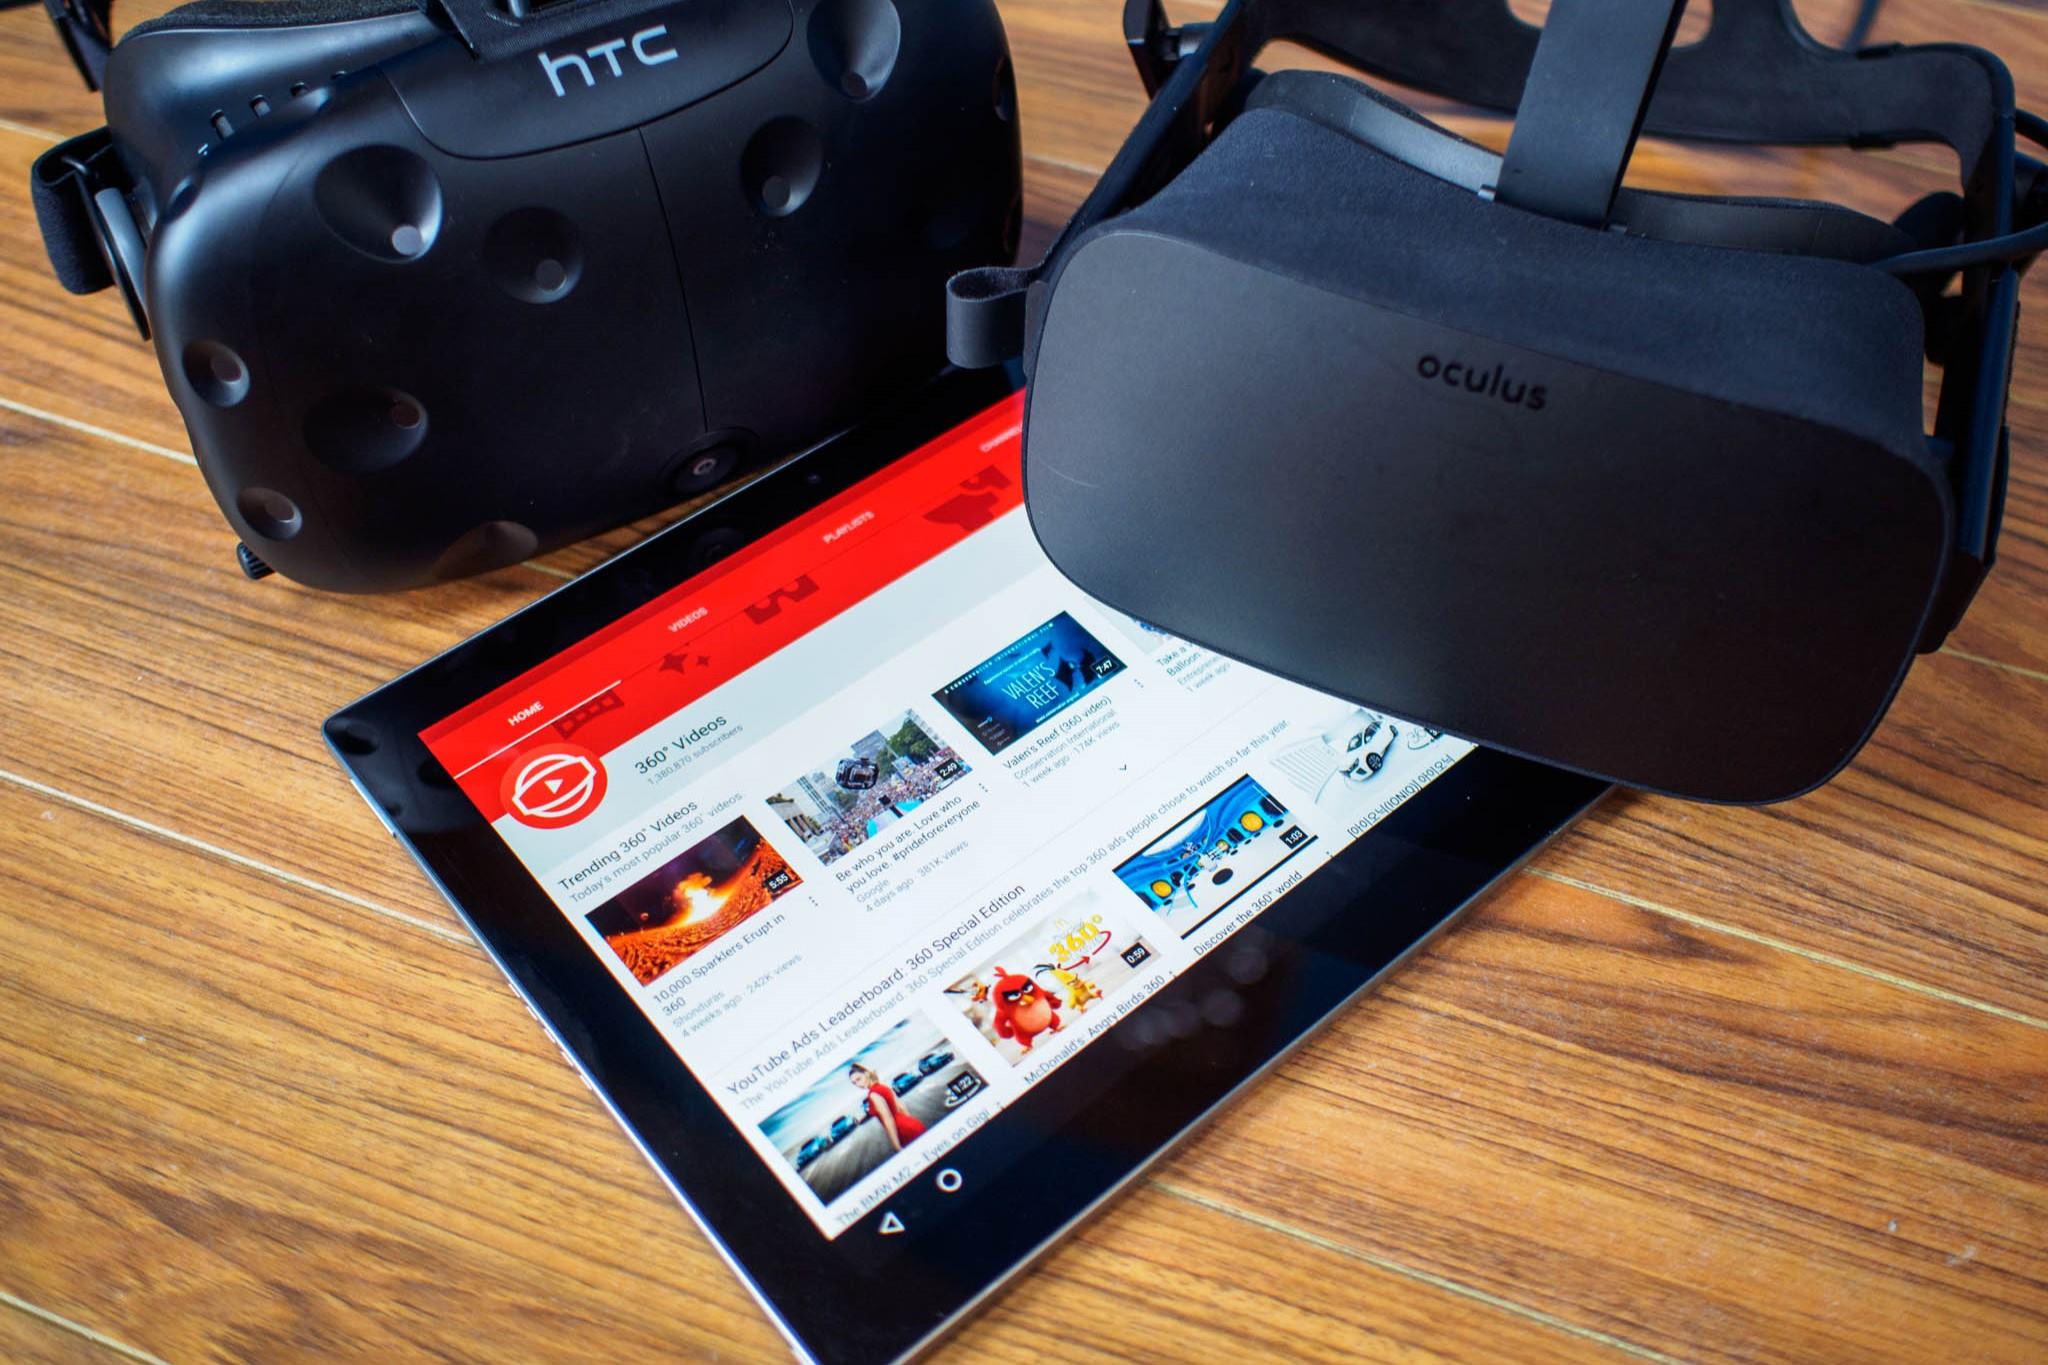 How To Watch YouTube With Oculus Rift